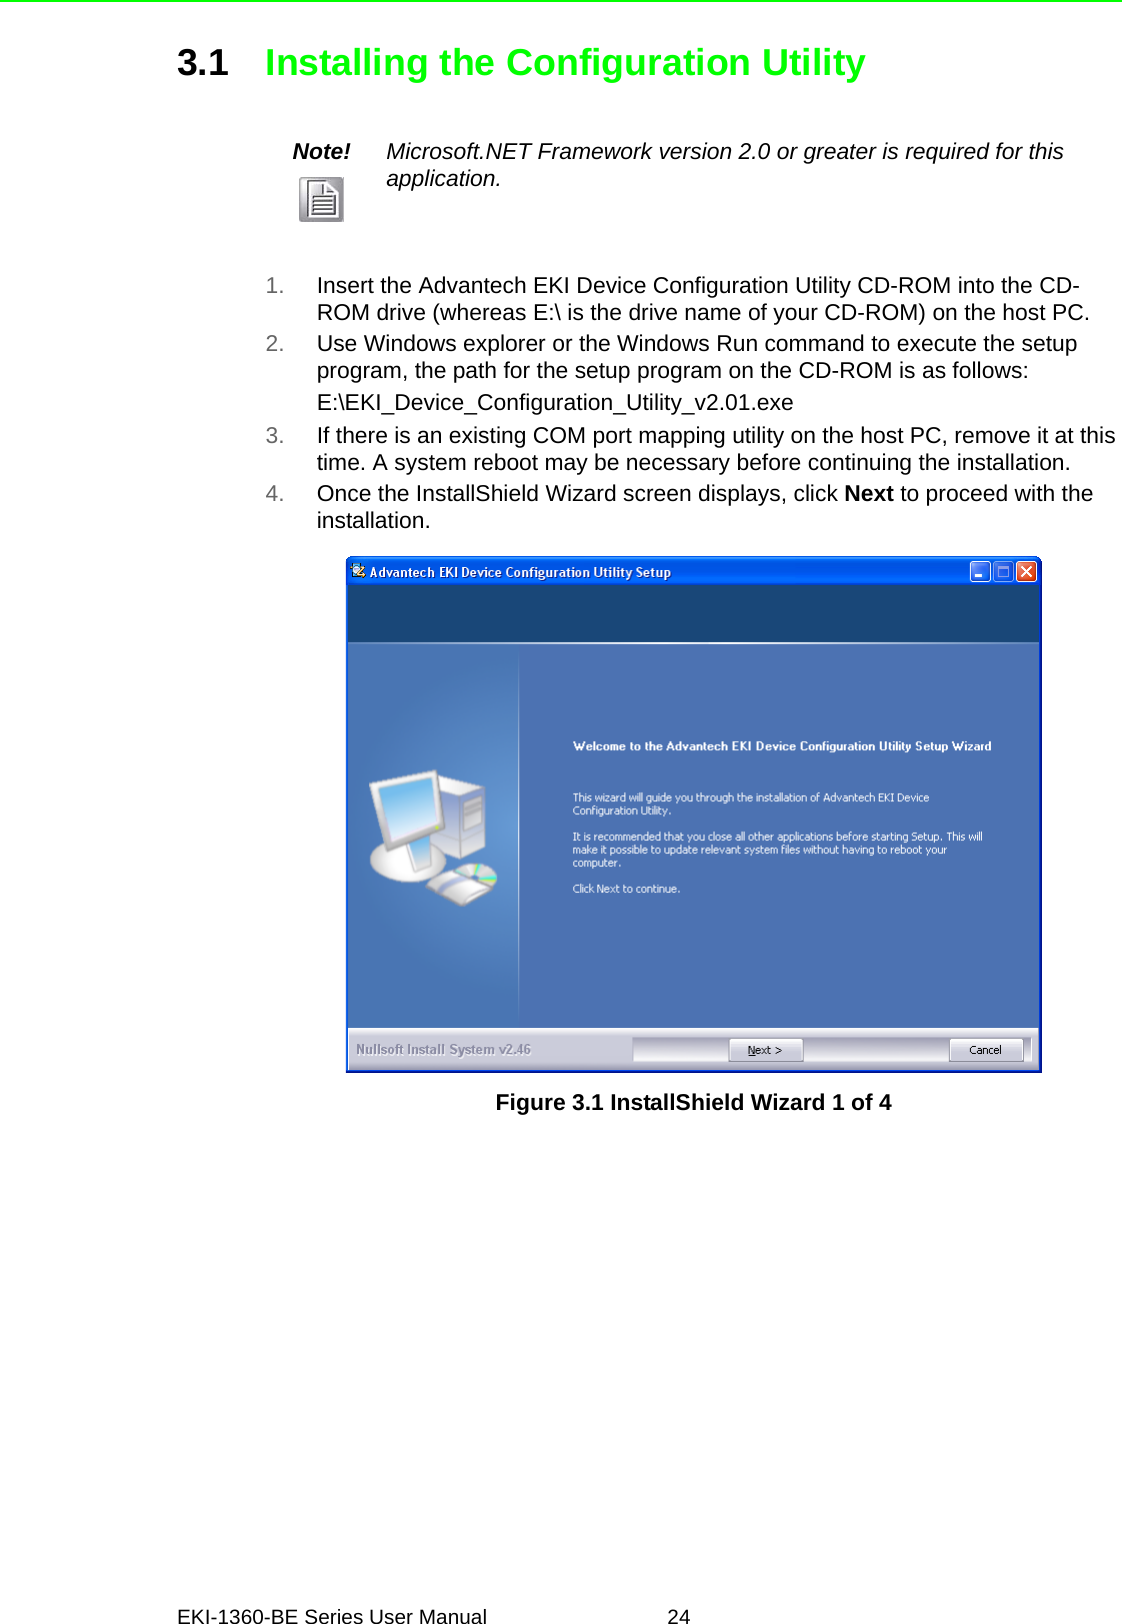 EKI-1360-BE Series User Manual 243.1 Installing the Configuration Utility1. Insert the Advantech EKI Device Configuration Utility CD-ROM into the CD-ROM drive (whereas E:\ is the drive name of your CD-ROM) on the host PC.2. Use Windows explorer or the Windows Run command to execute the setup program, the path for the setup program on the CD-ROM is as follows:E:\EKI_Device_Configuration_Utility_v2.01.exe3. If there is an existing COM port mapping utility on the host PC, remove it at this time. A system reboot may be necessary before continuing the installation.4. Once the InstallShield Wizard screen displays, click Next to proceed with the installation.Figure 3.1 InstallShield Wizard 1 of 4Note! Microsoft.NET Framework version 2.0 or greater is required for this application.